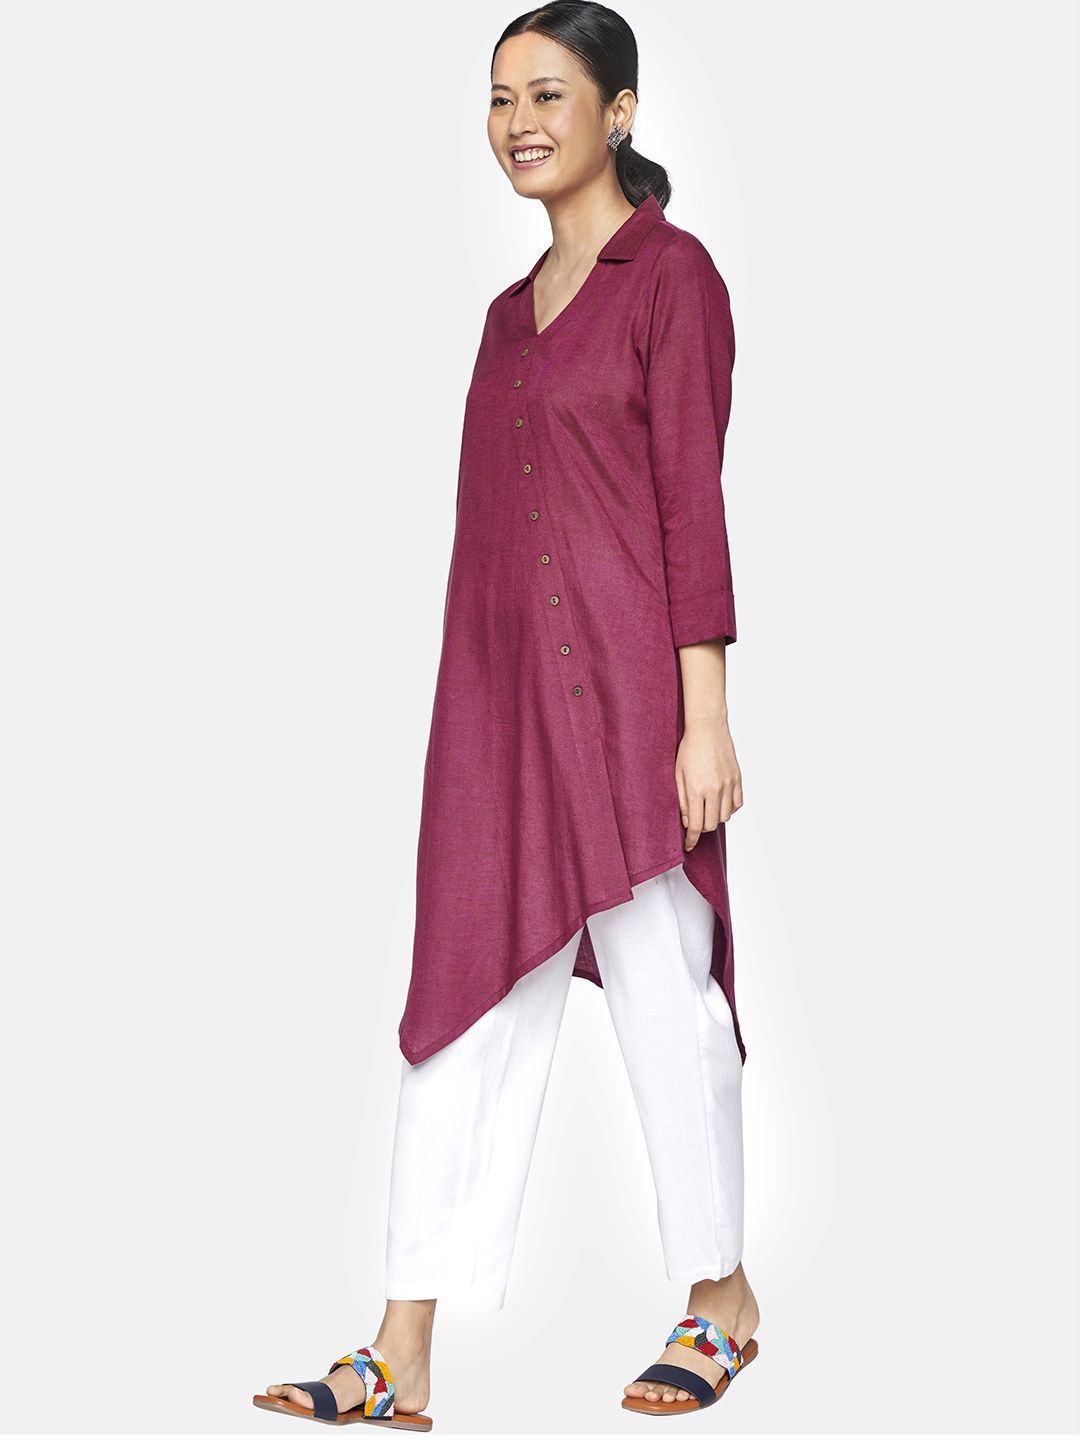 Global Desi Burgundy Viscose Rayon Shirt Collar Tunic with Button Detailing Price in India